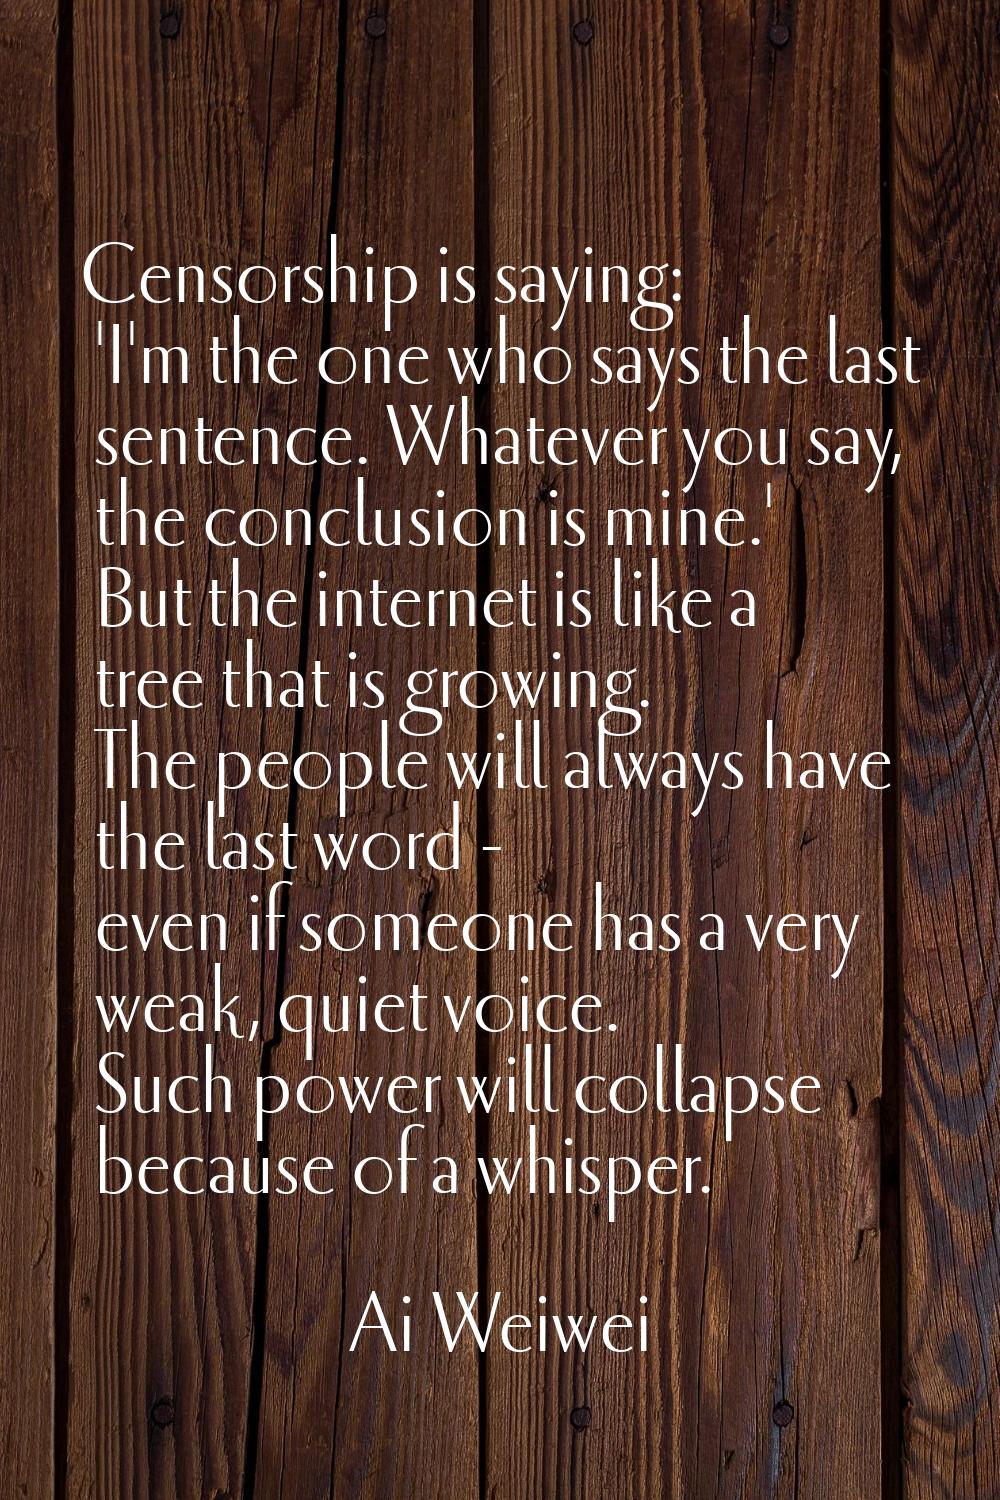 Censorship is saying: 'I'm the one who says the last sentence. Whatever you say, the conclusion is 